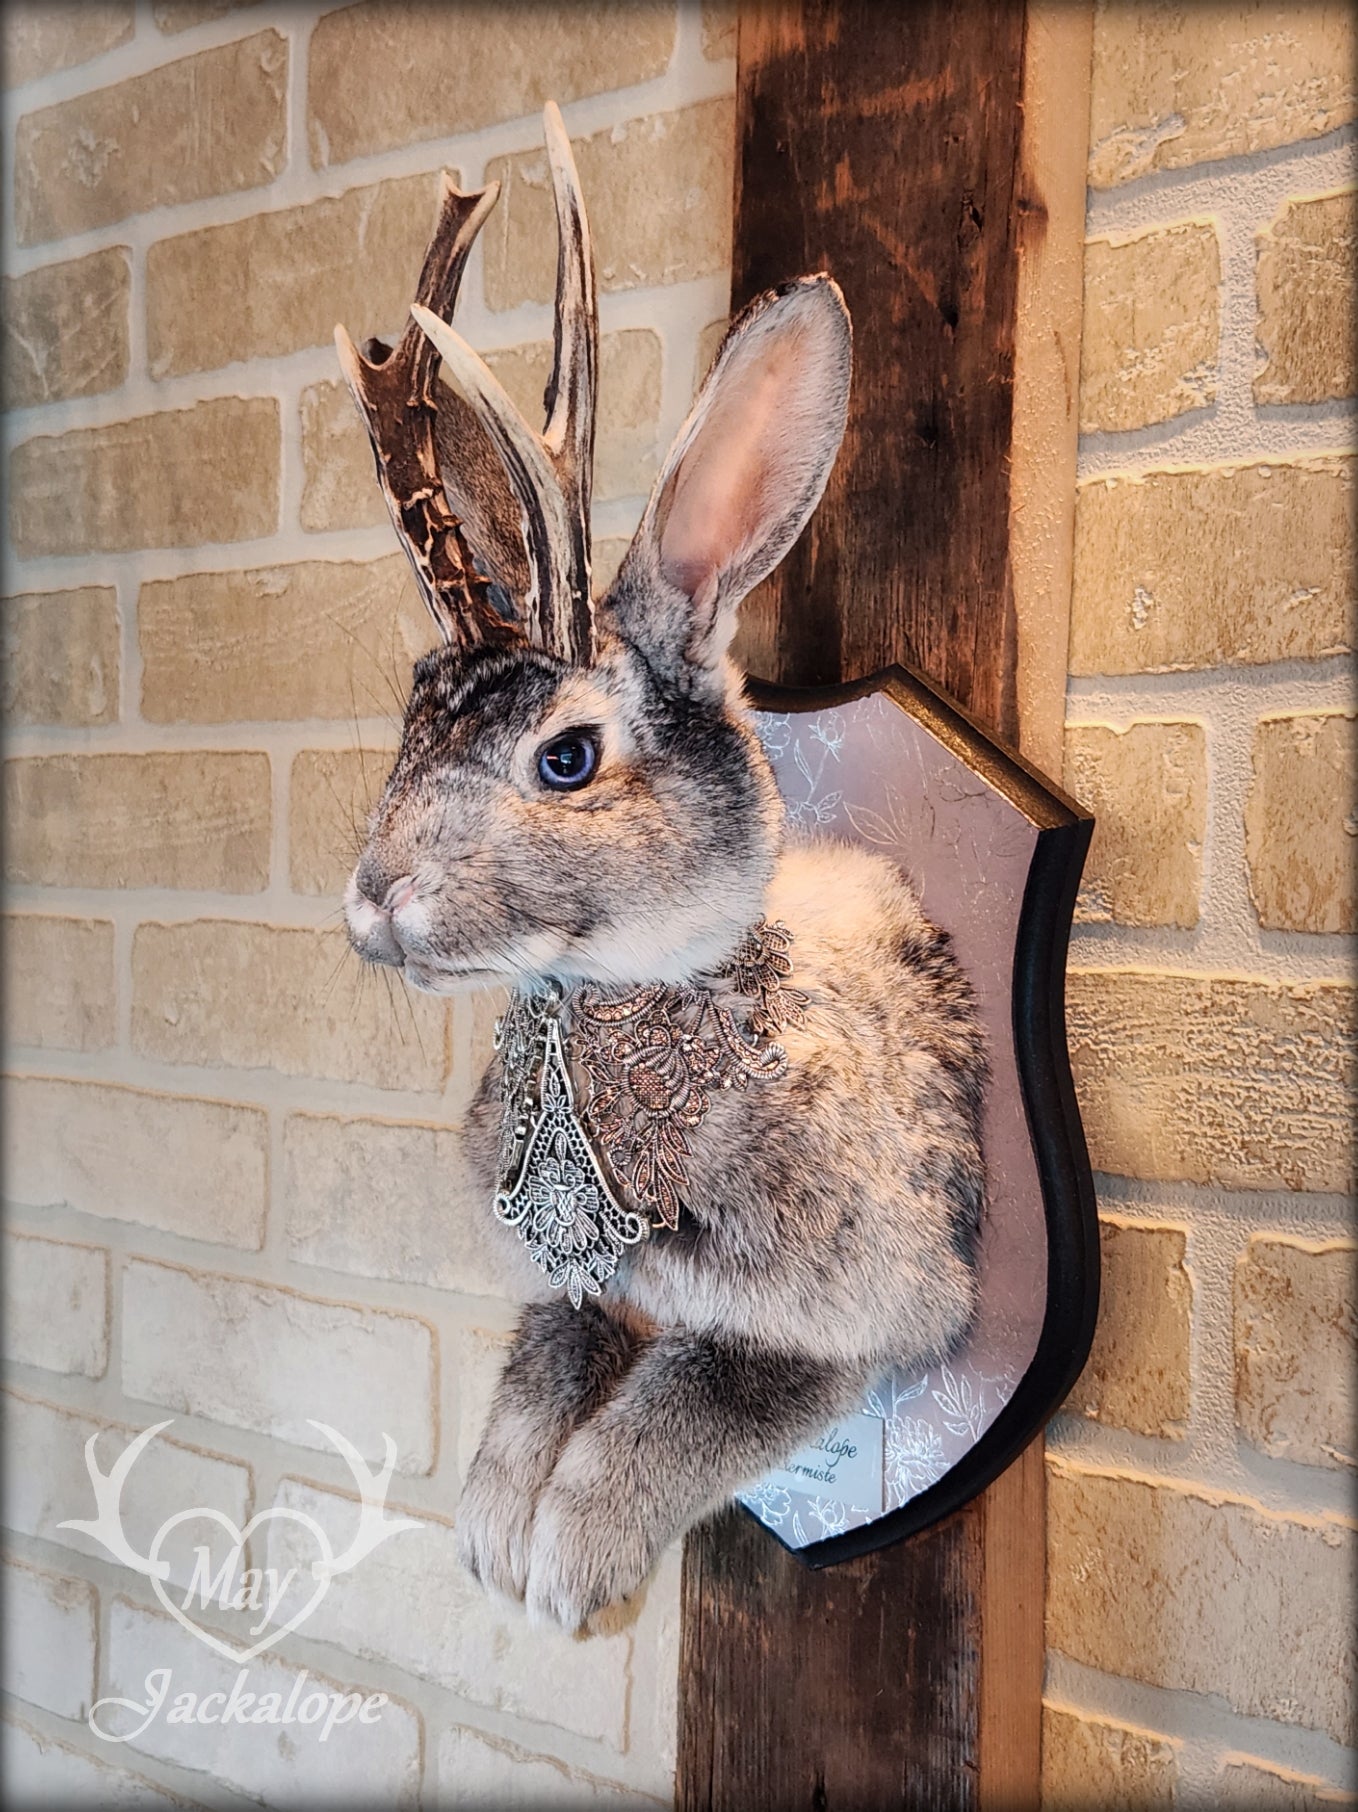 Grey Jackalope taxidermy with blue eyes, real antlers & necklace.